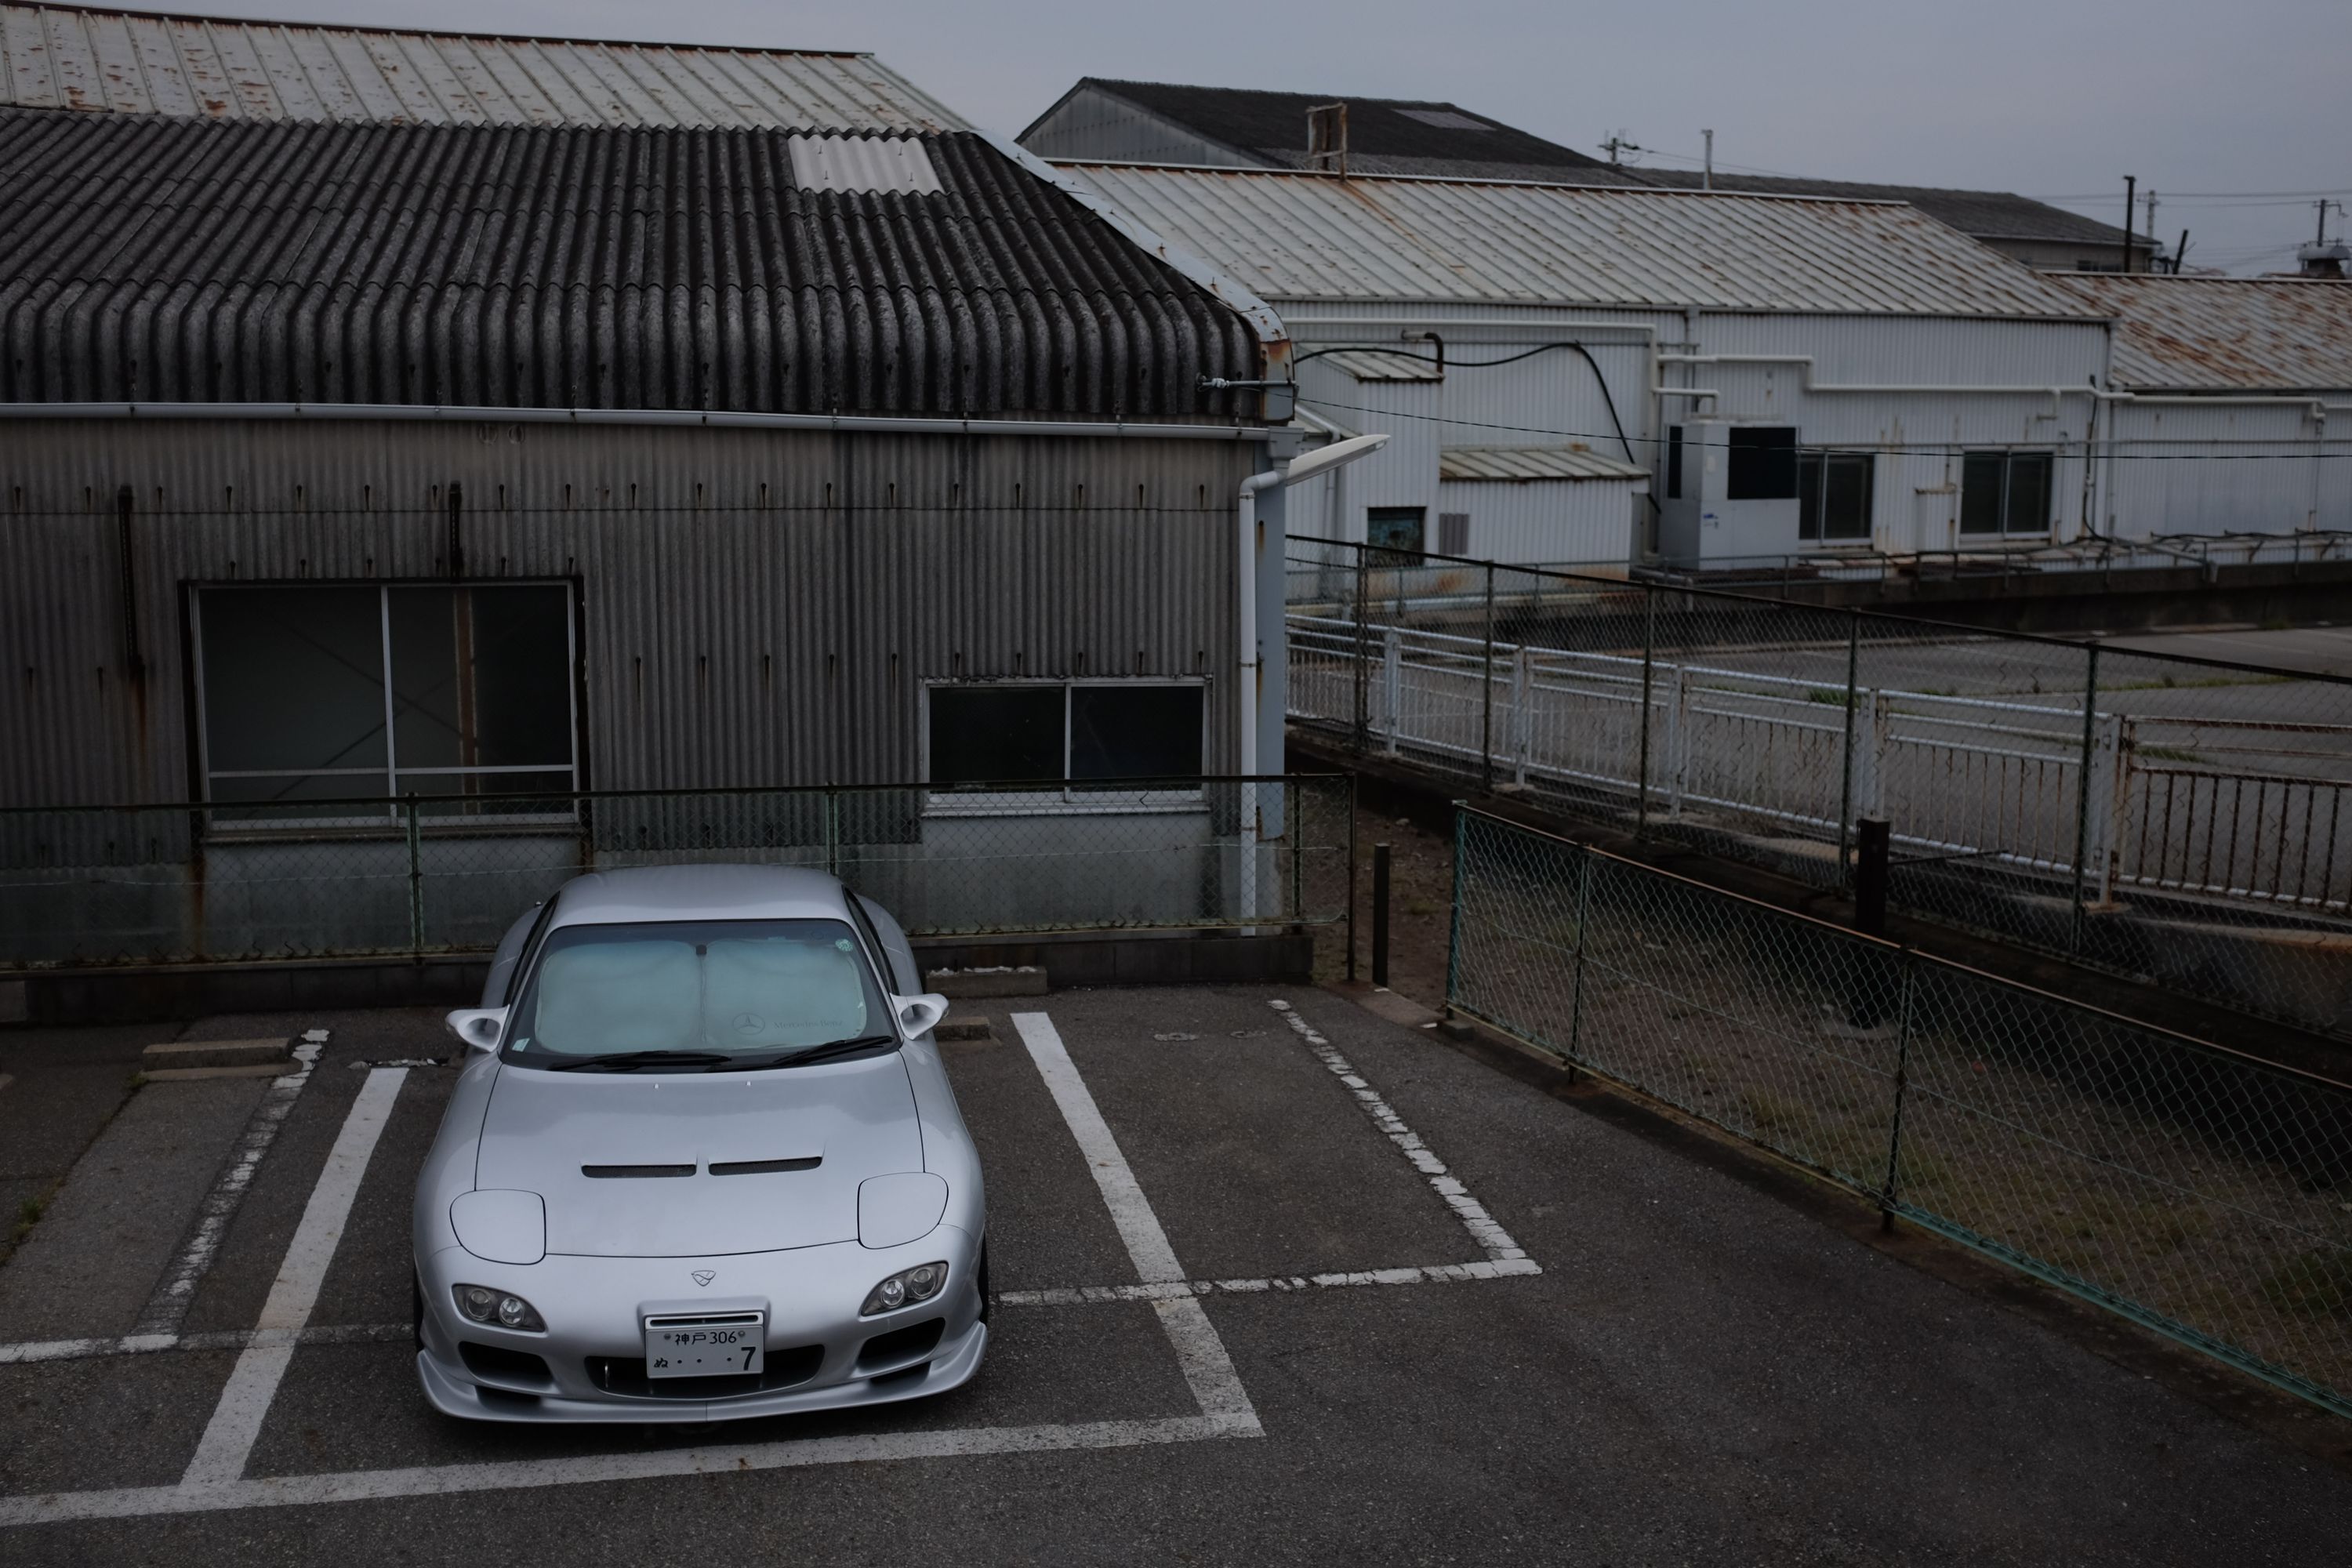 A silver Maxda RX–7 sports car parked in front of gray industrial buildings.